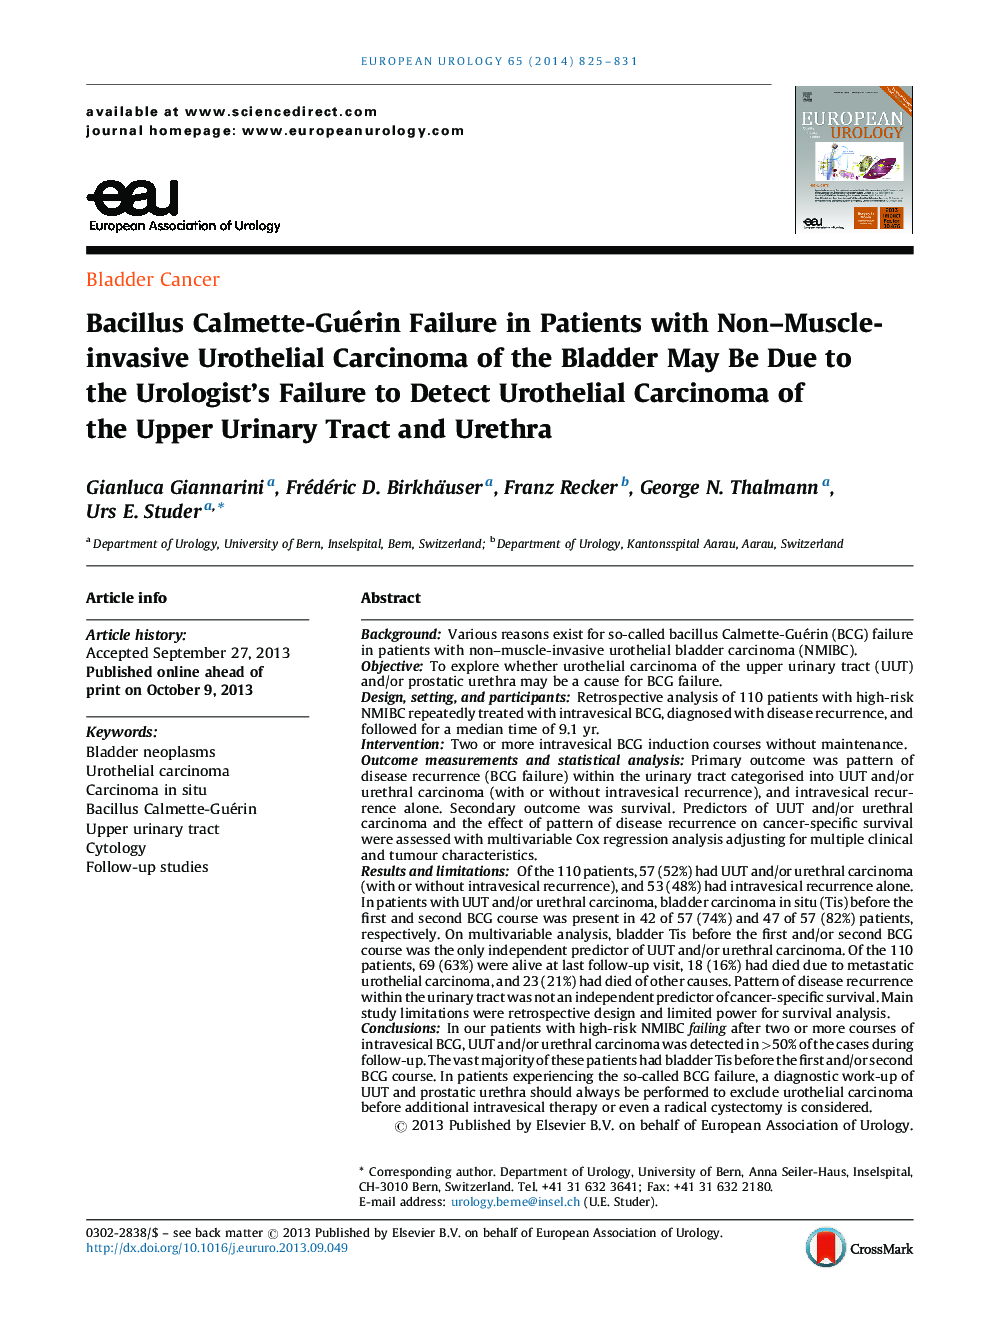 Bacillus Calmette-Guérin Failure in Patients with Non–Muscle-invasive Urothelial Carcinoma of the Bladder May Be Due to the Urologist's Failure to Detect Urothelial Carcinoma of the Upper Urinary Tract and Urethra